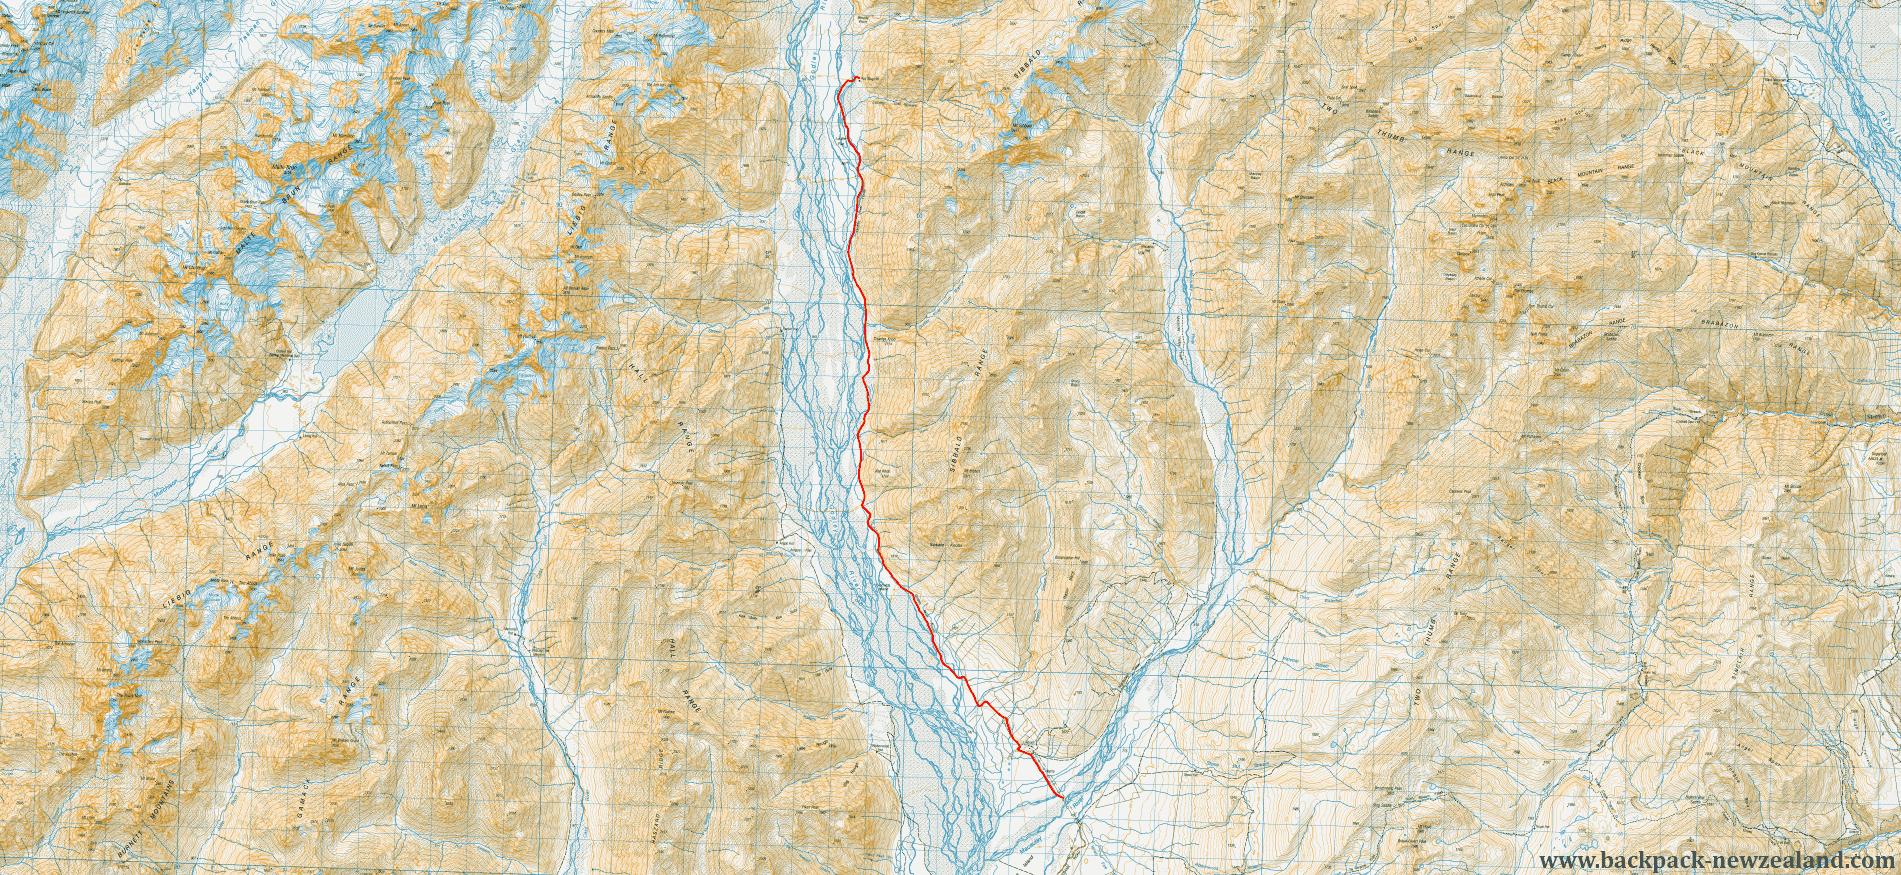 Godley River Route Map - New Zealand Tracks